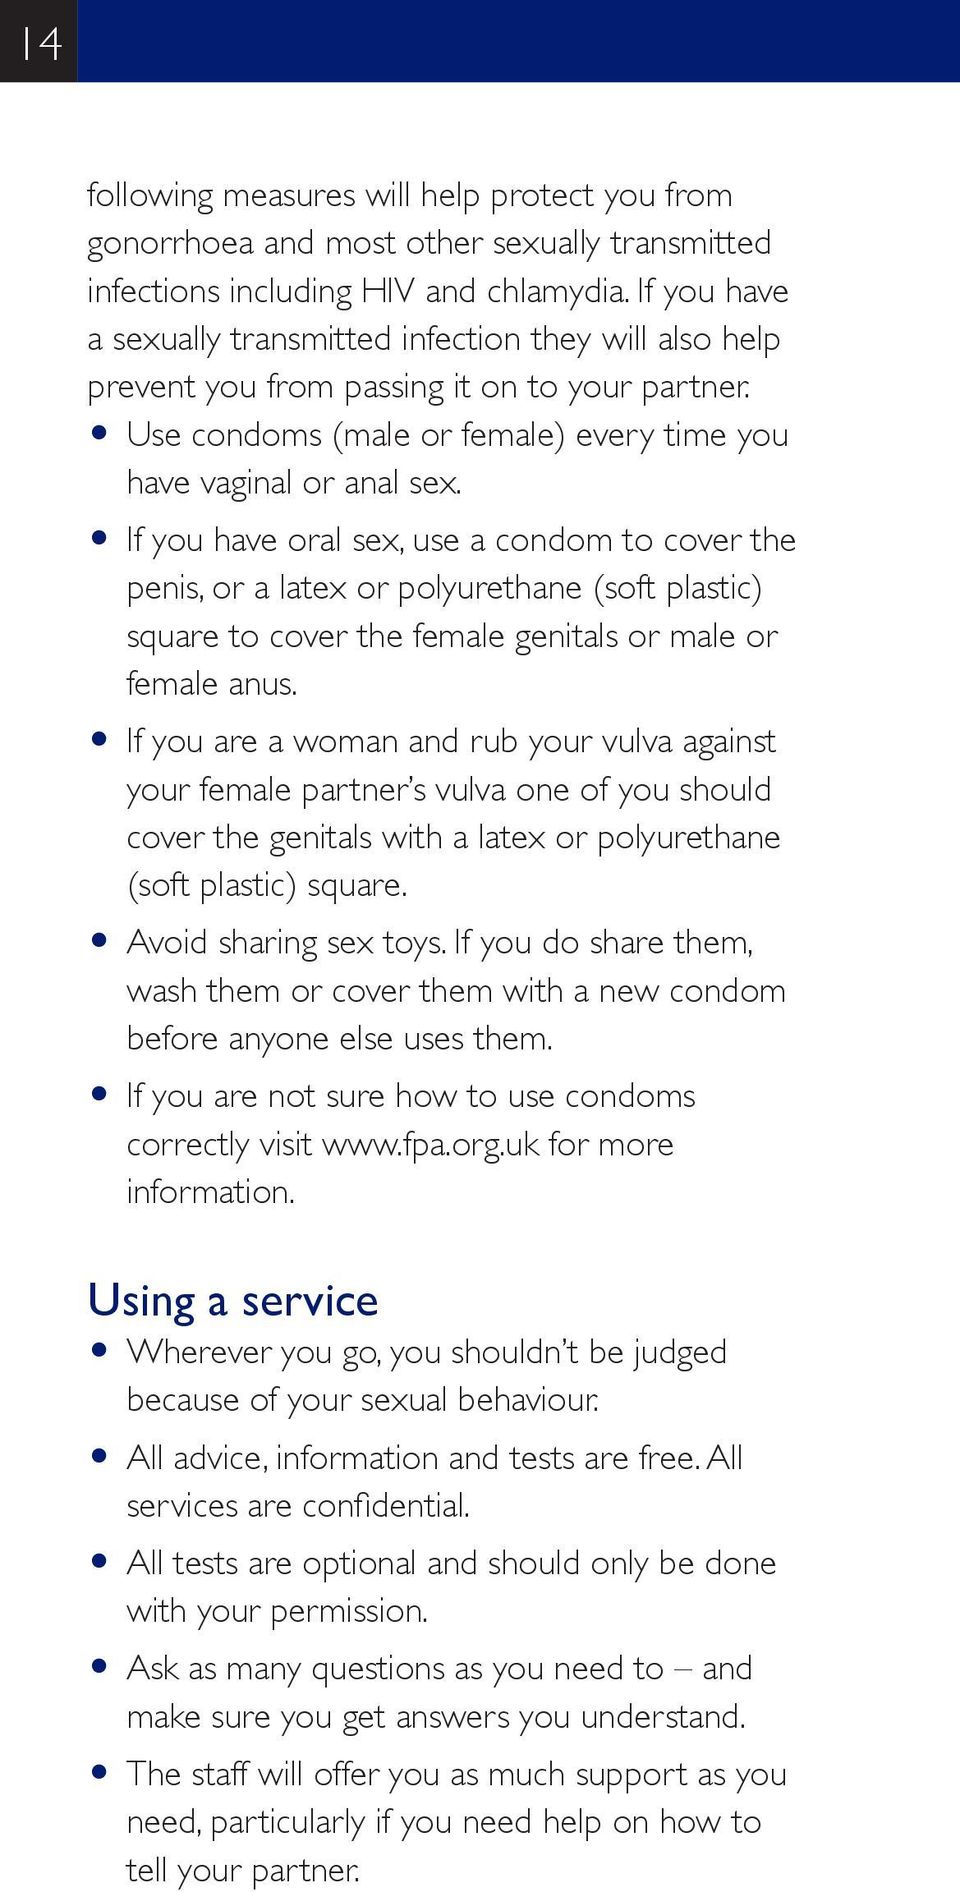 O If you have oral sex, use a condom to cover the penis, or a latex or polyurethane (soft plastic) square to cover the female genitals or male or female anus.